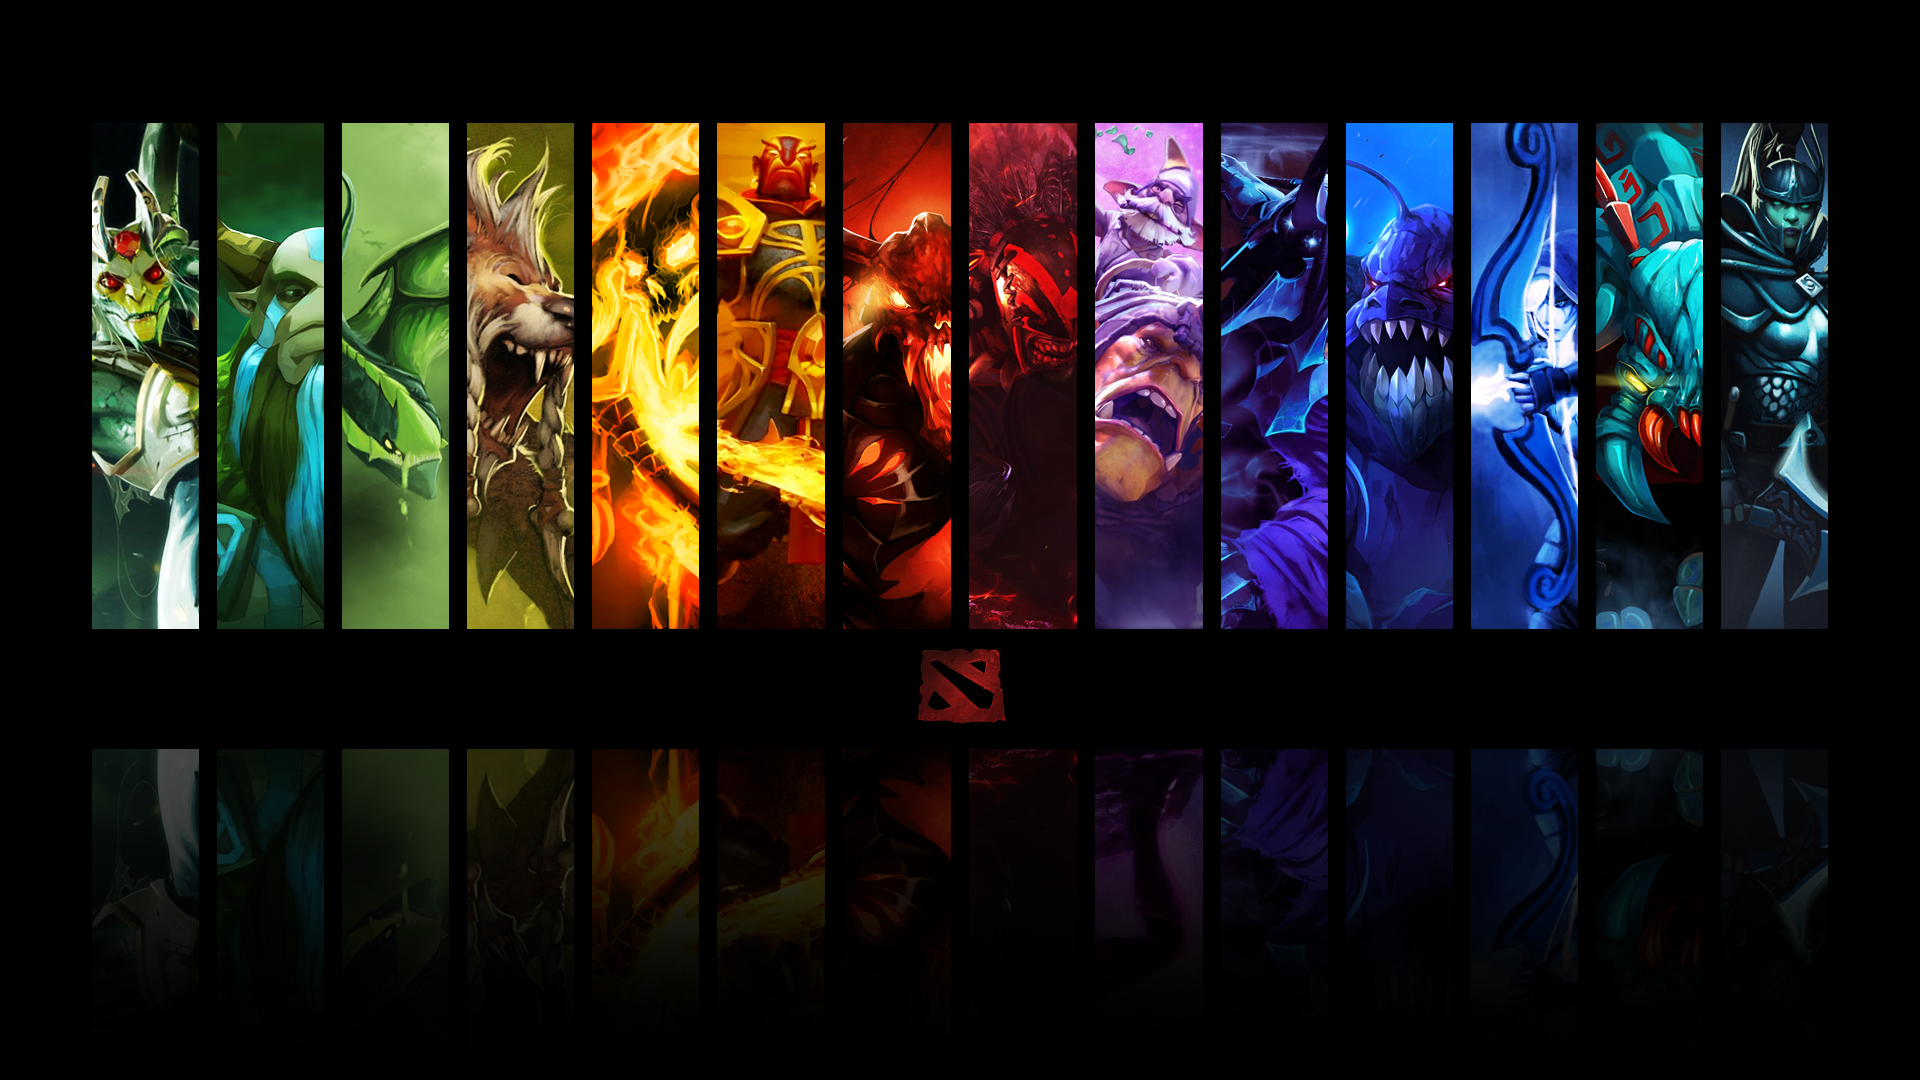 DotA 2 Hero Wallpaper v2: Carries only! [1920x1080] with more versions inside comments!